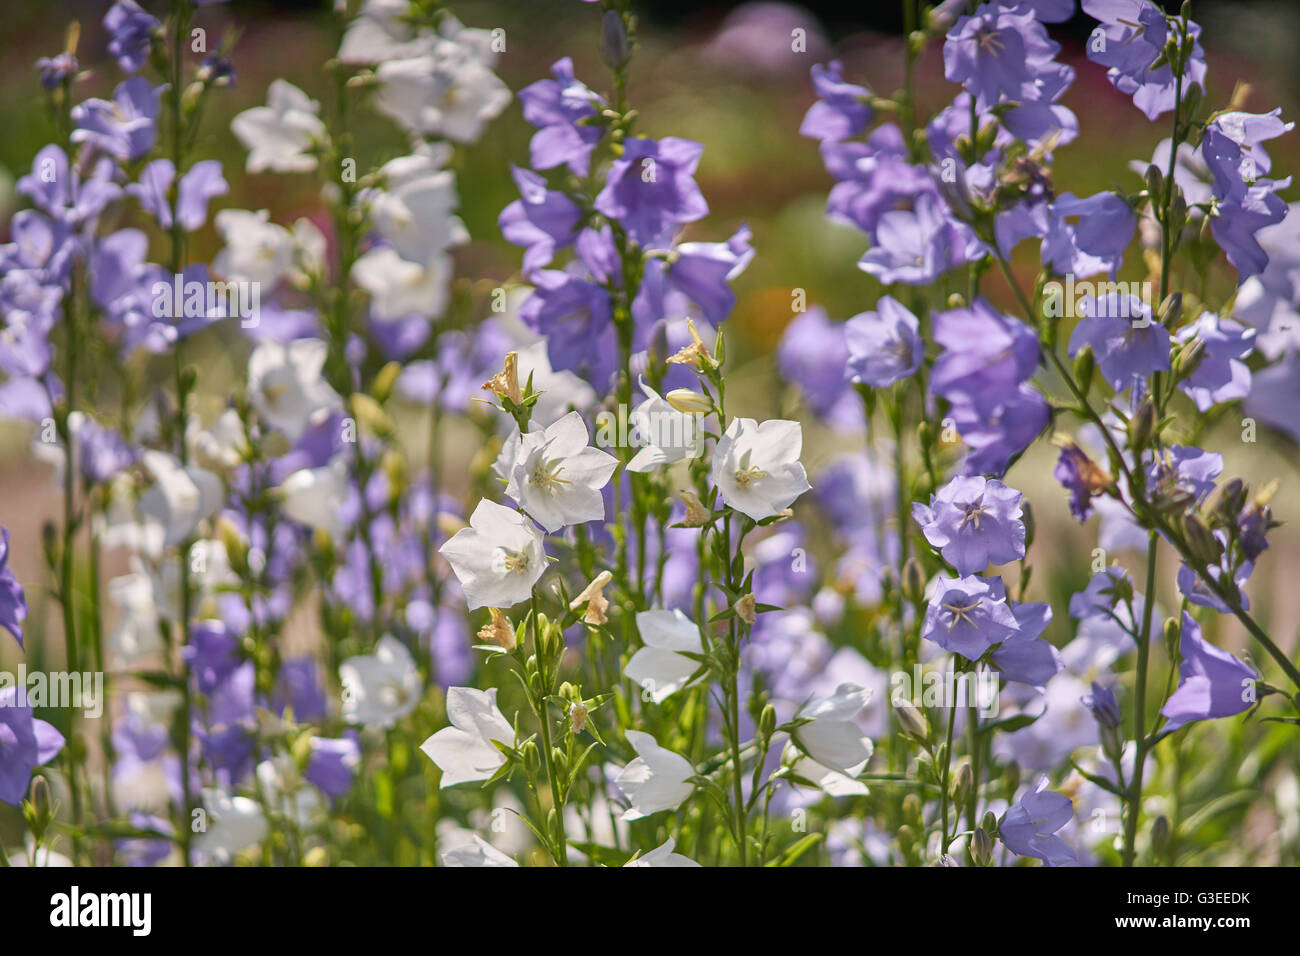 Purple and white bellflowers in the sun Stock Photo